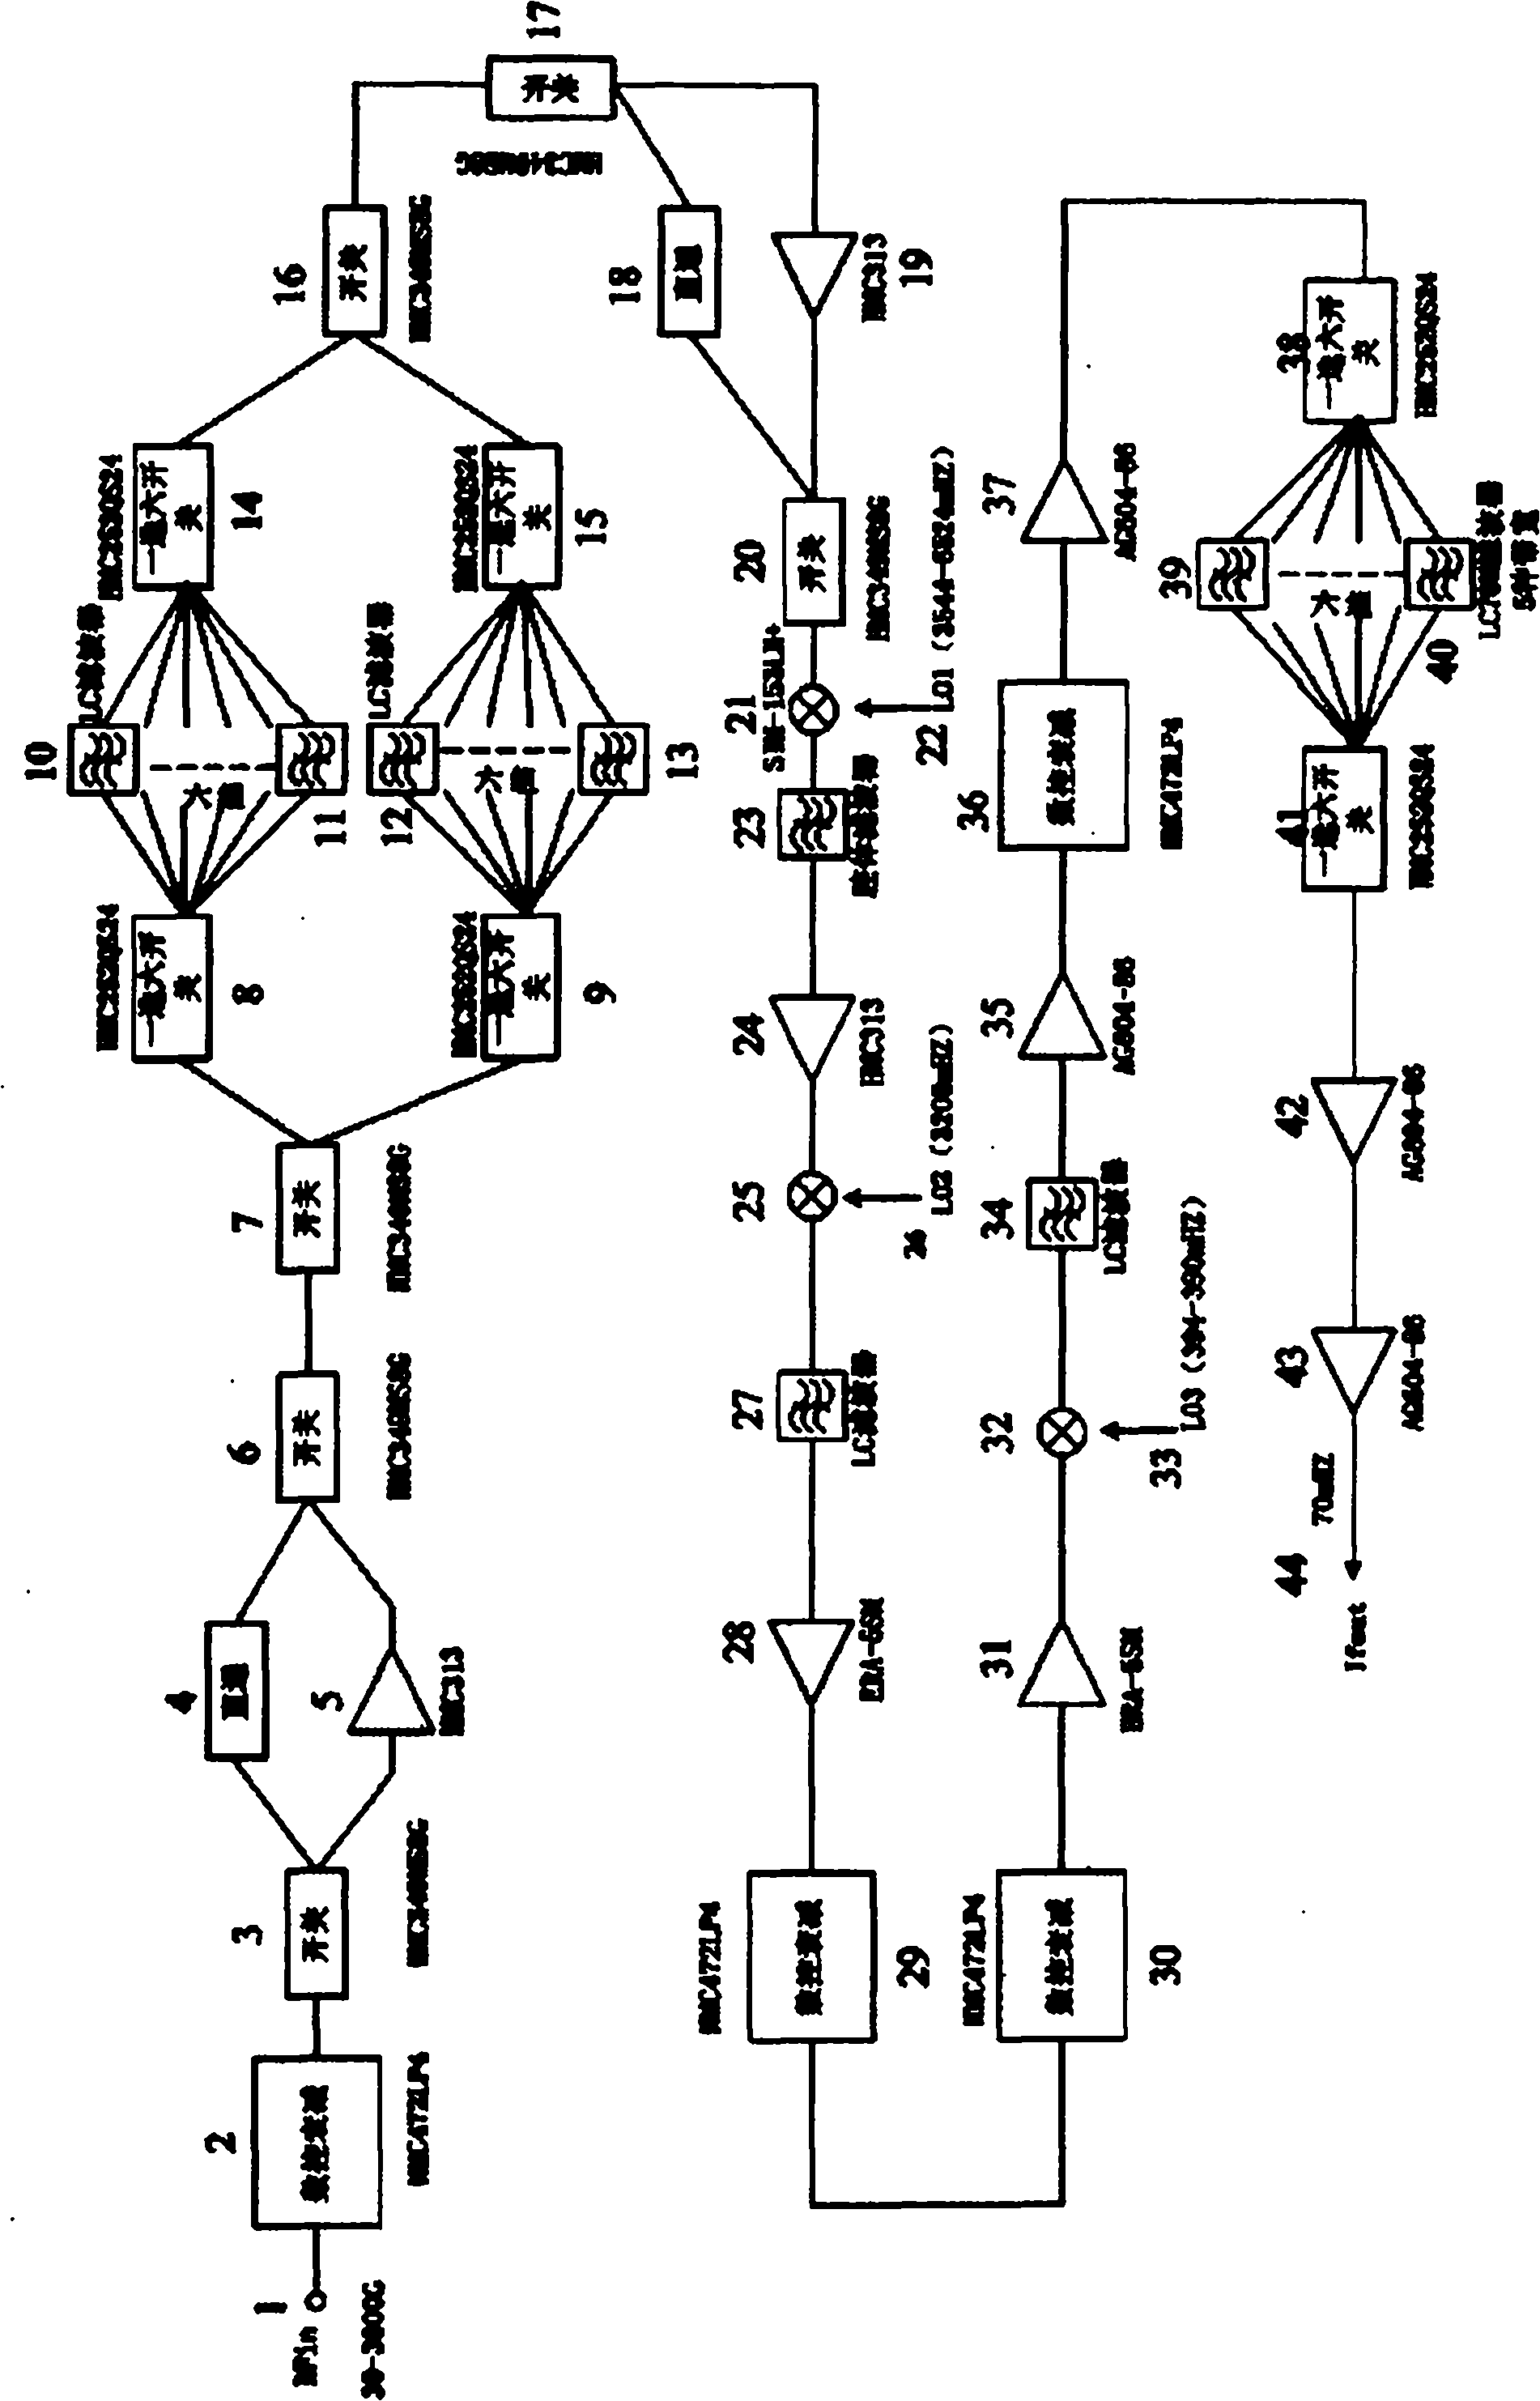 Broadband receiver with phase-locked loop local oscillation circuit